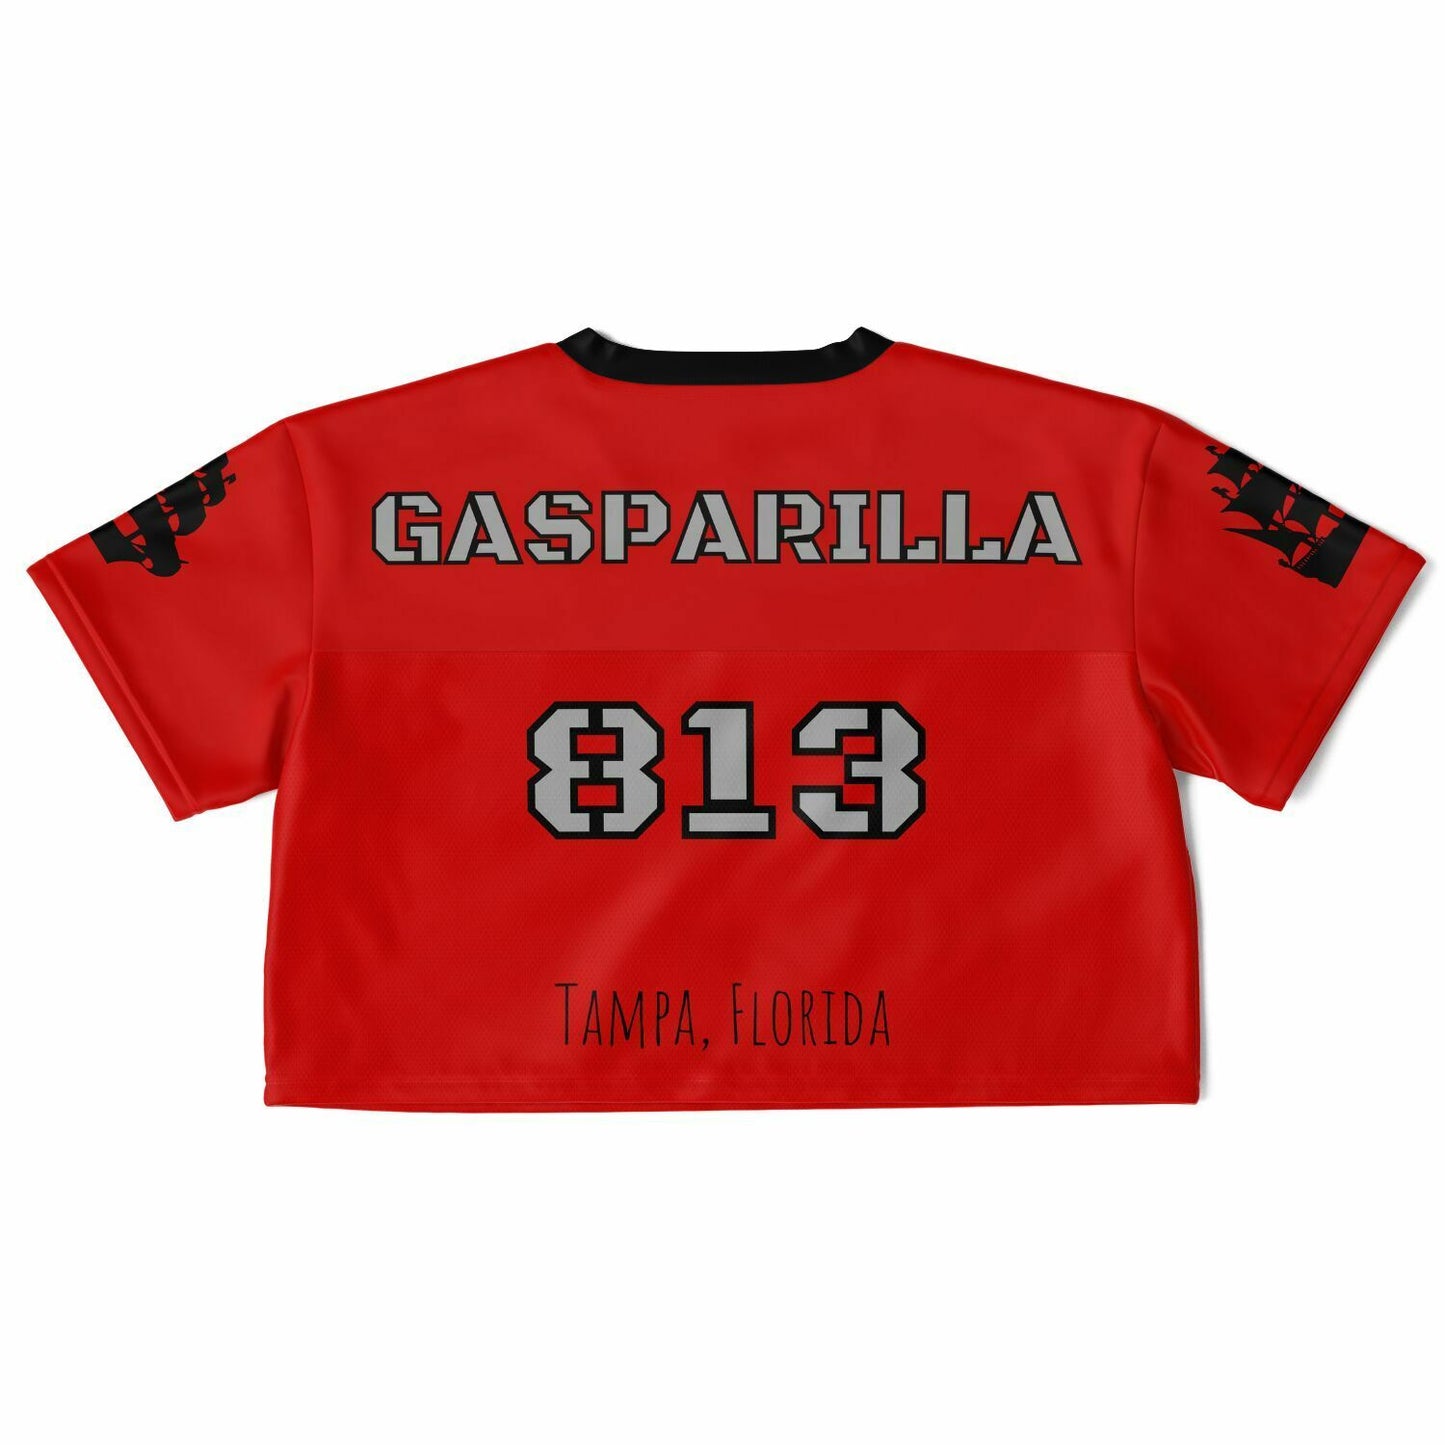 Are these Gasparilla jerseys available on the store? They are so